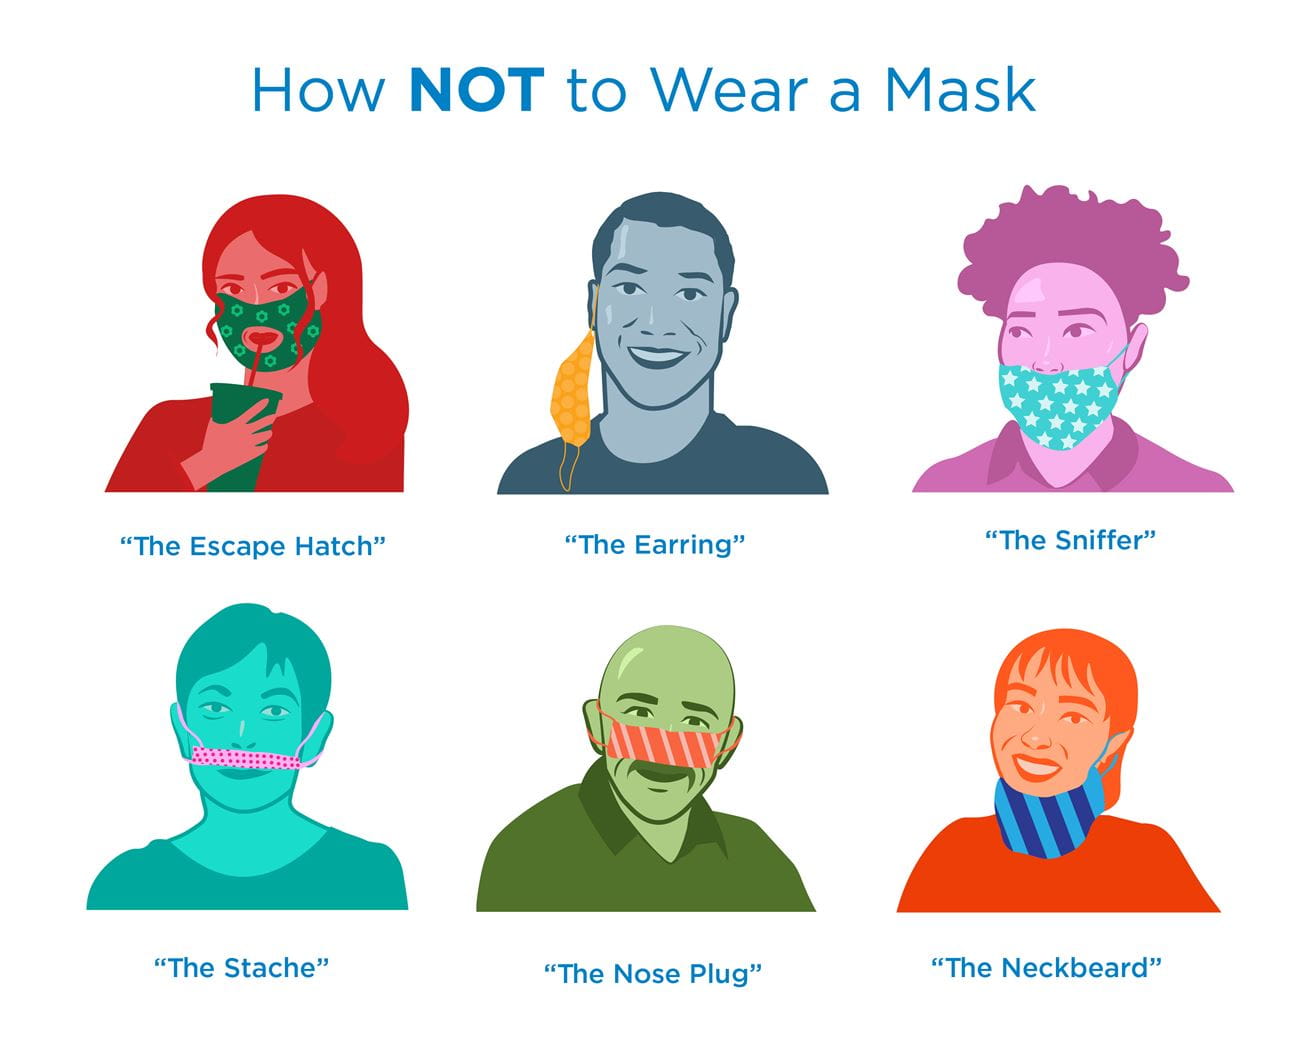 How to properly wear a mask